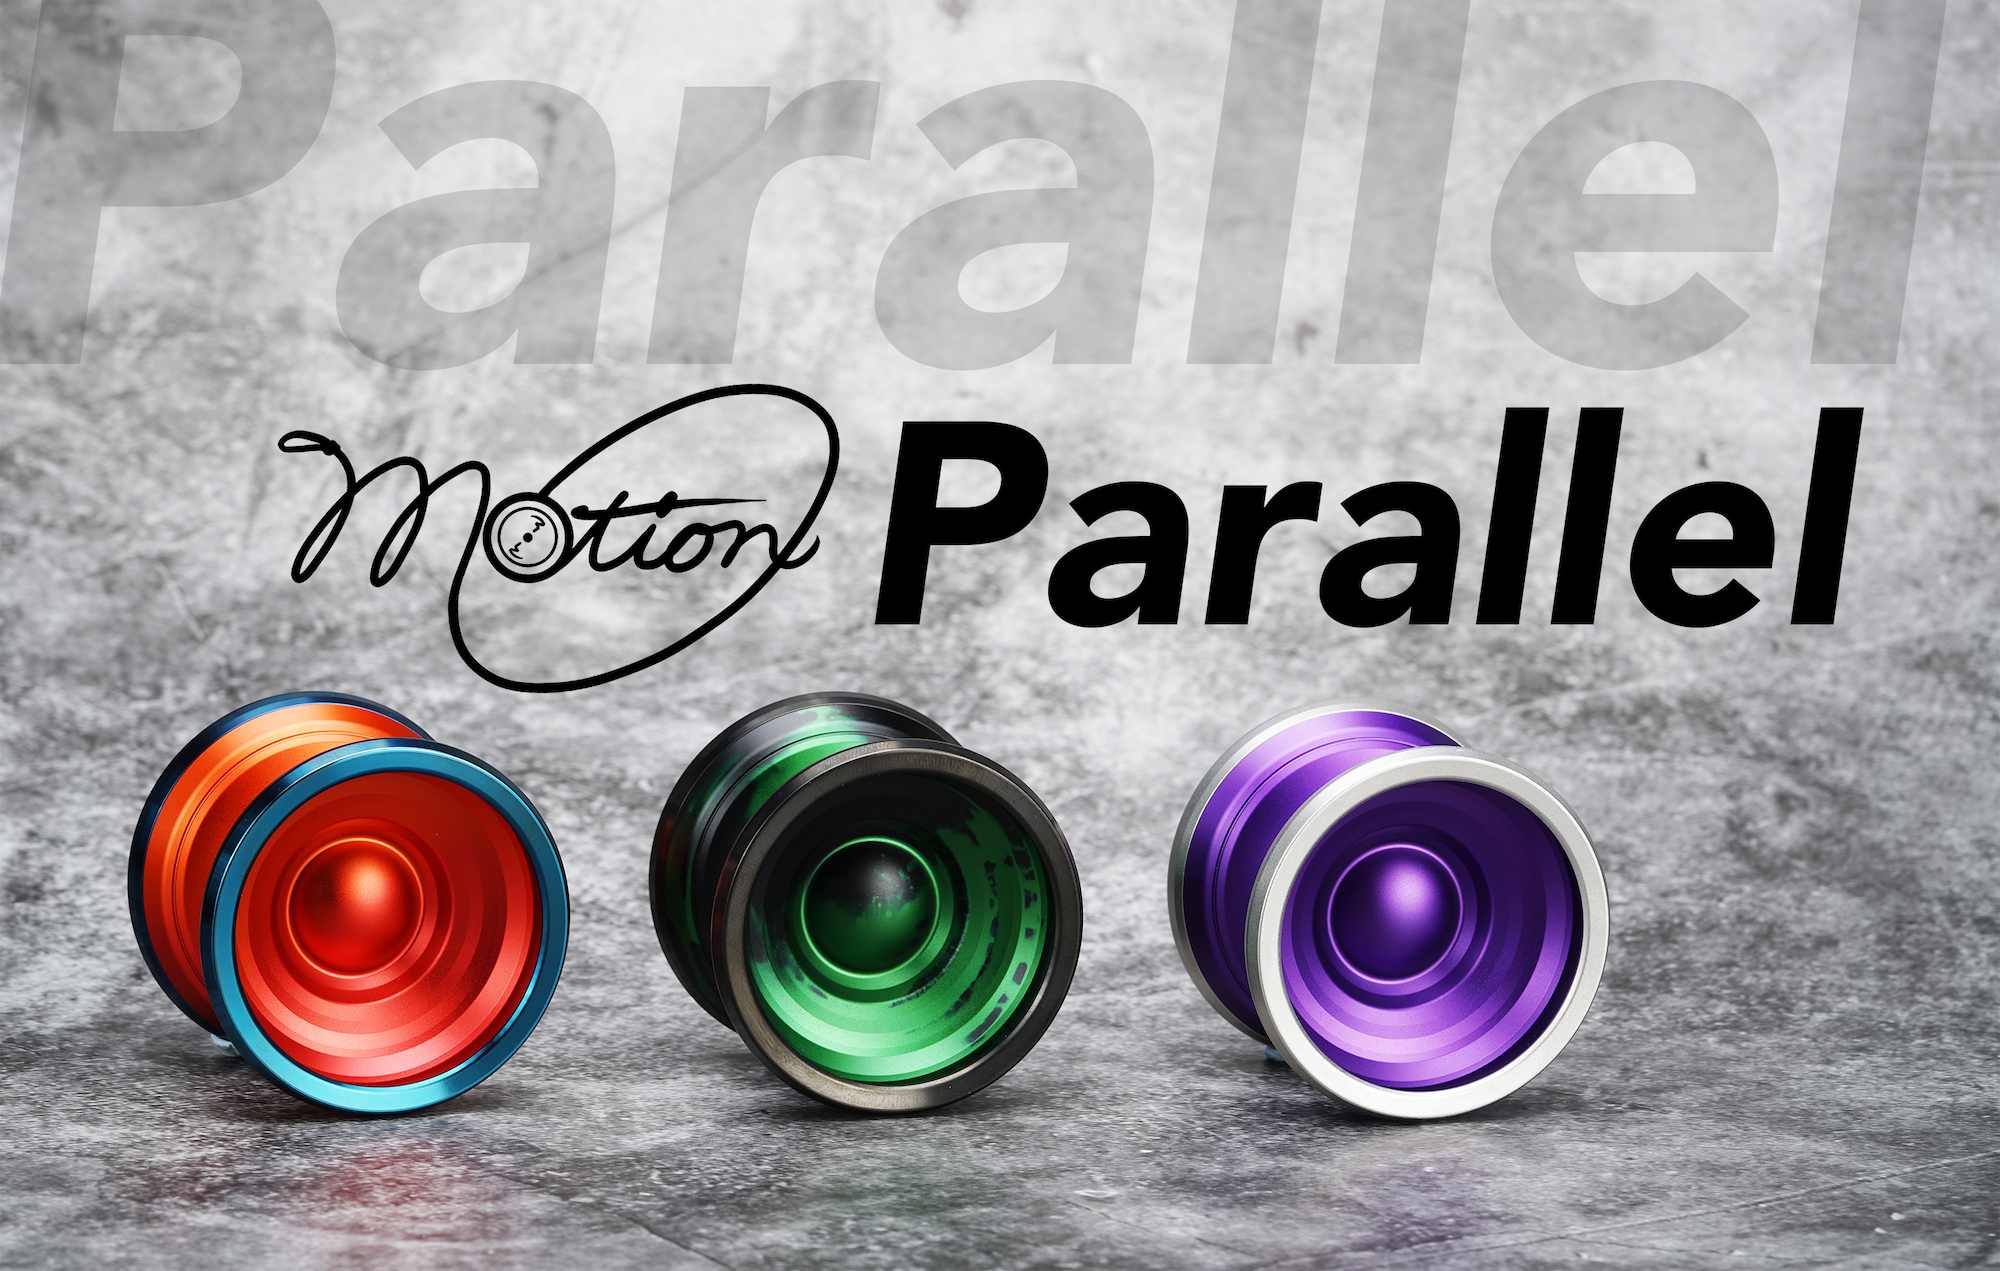 Parallel  by Motion